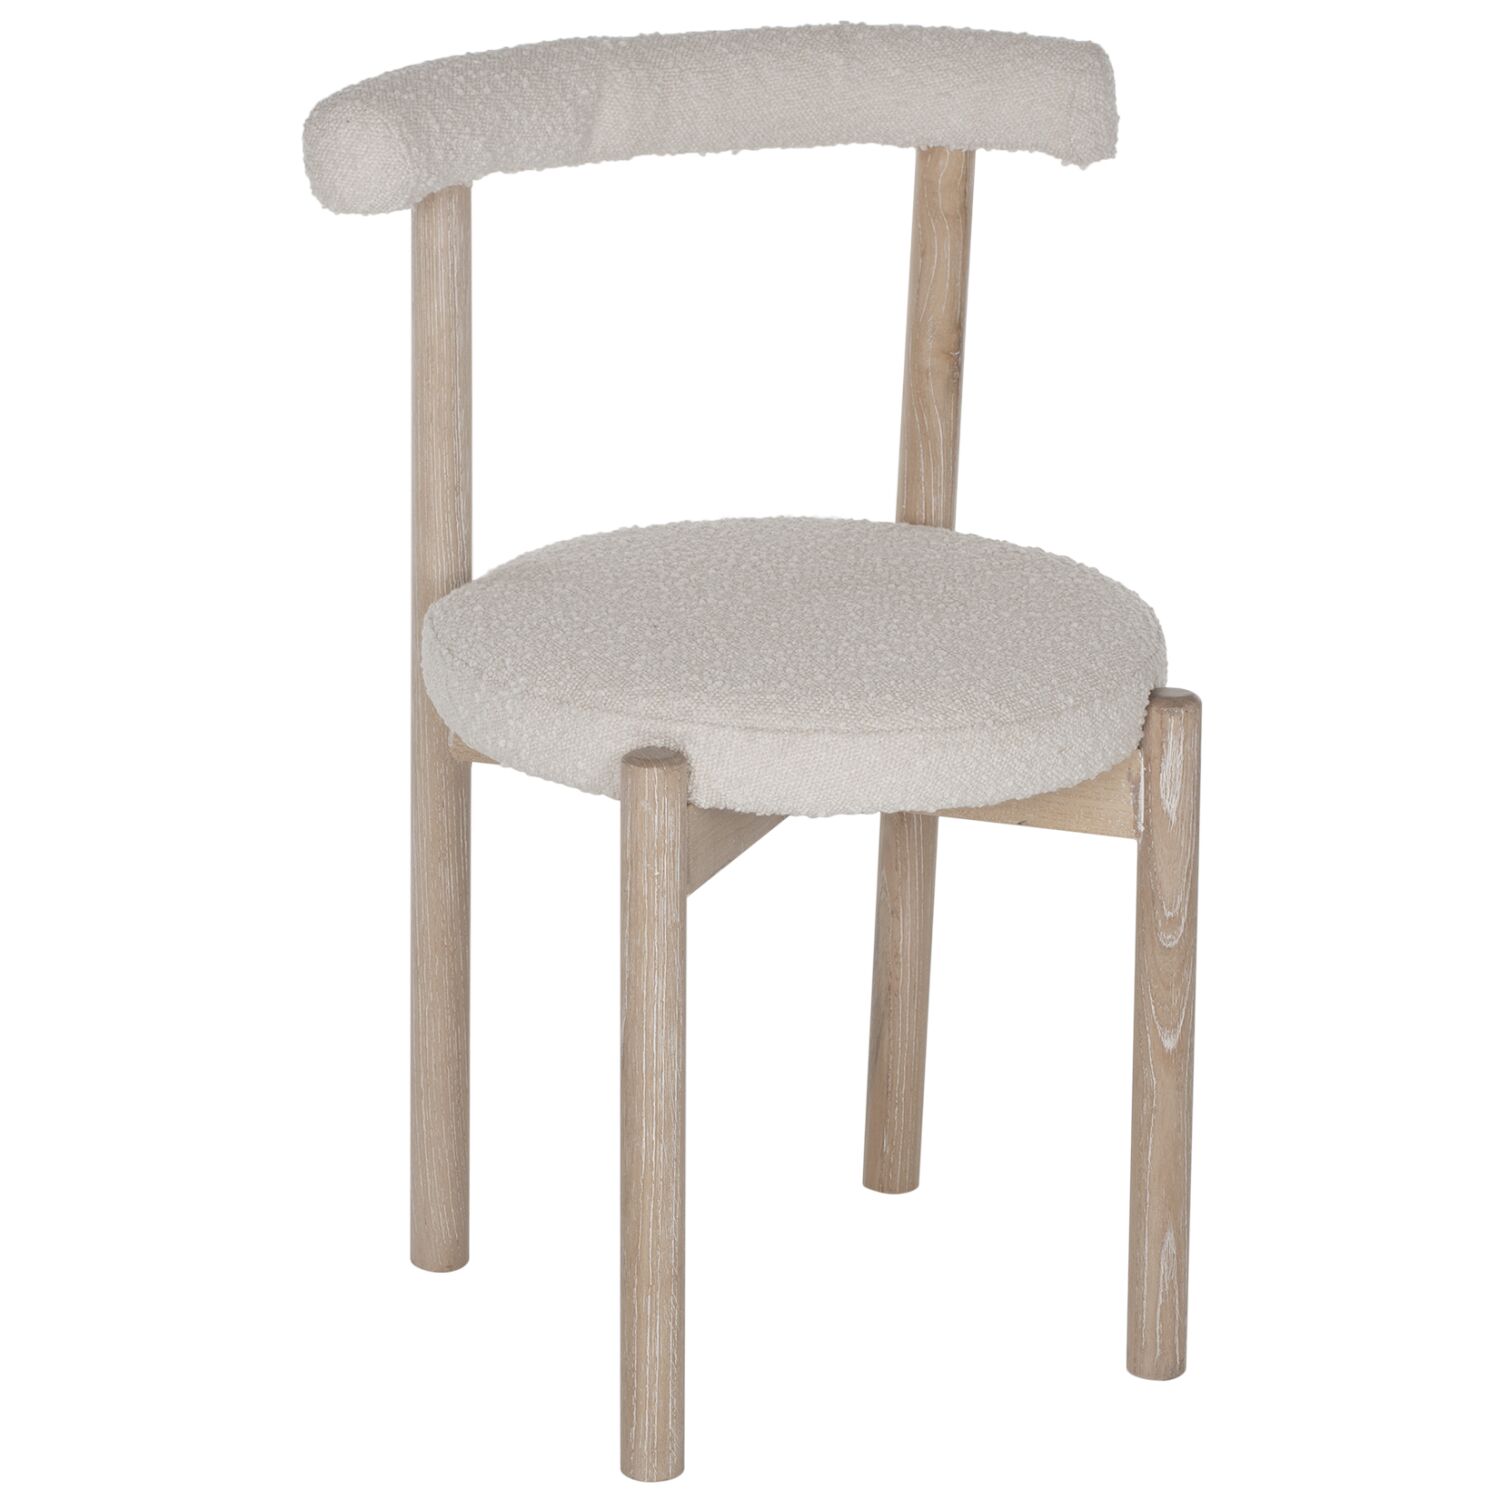 CHAIR ROUND SEAT- BEECH WOOD NATURAL-FABRIC WHITE 50x48x81Hcm.HM9409.01